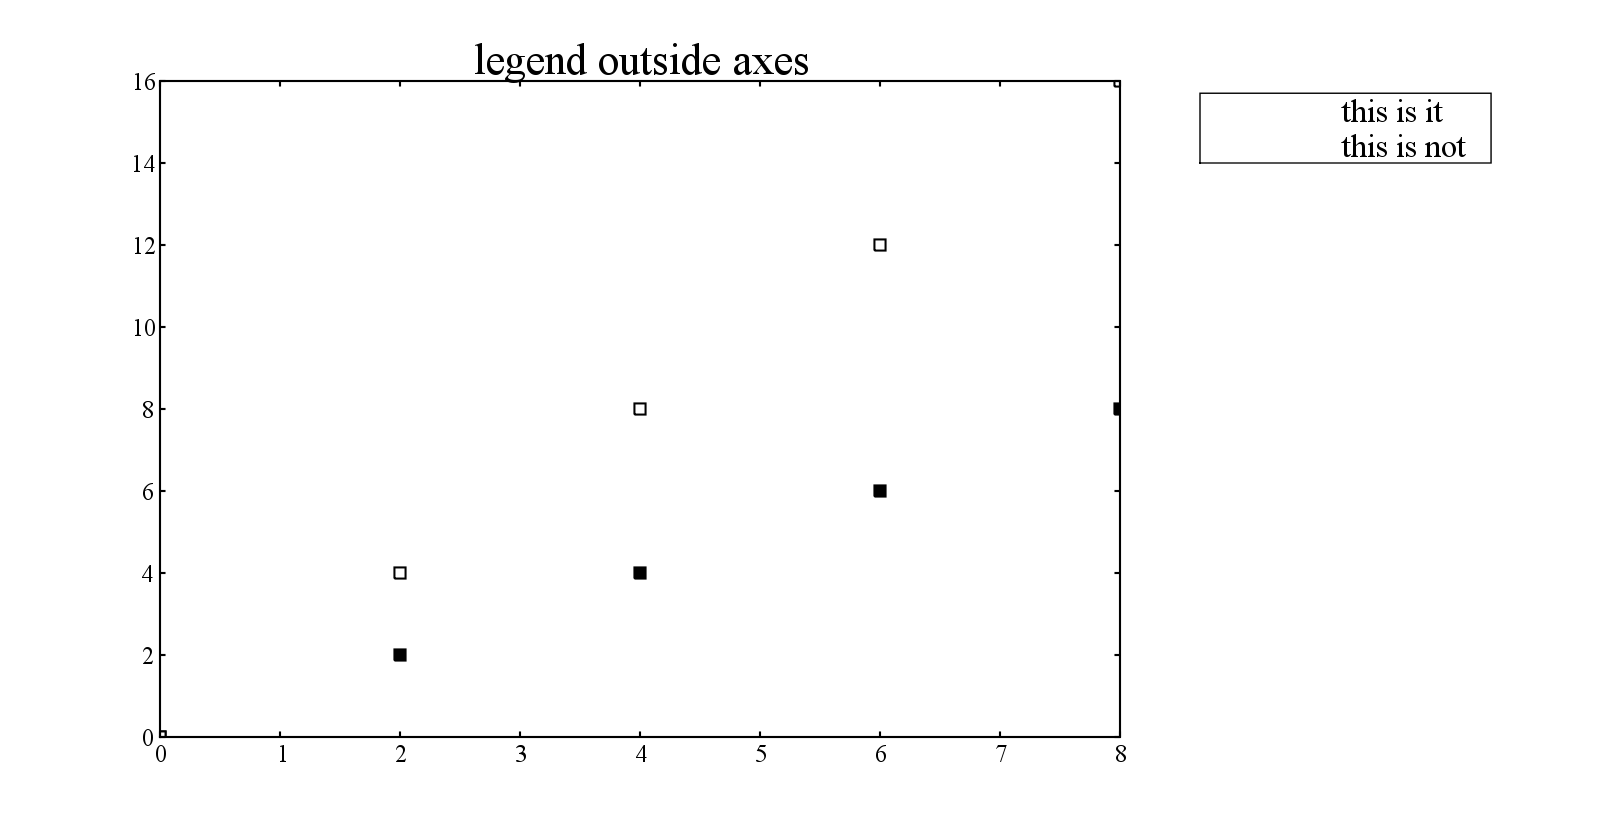 legend_outside_axes.png